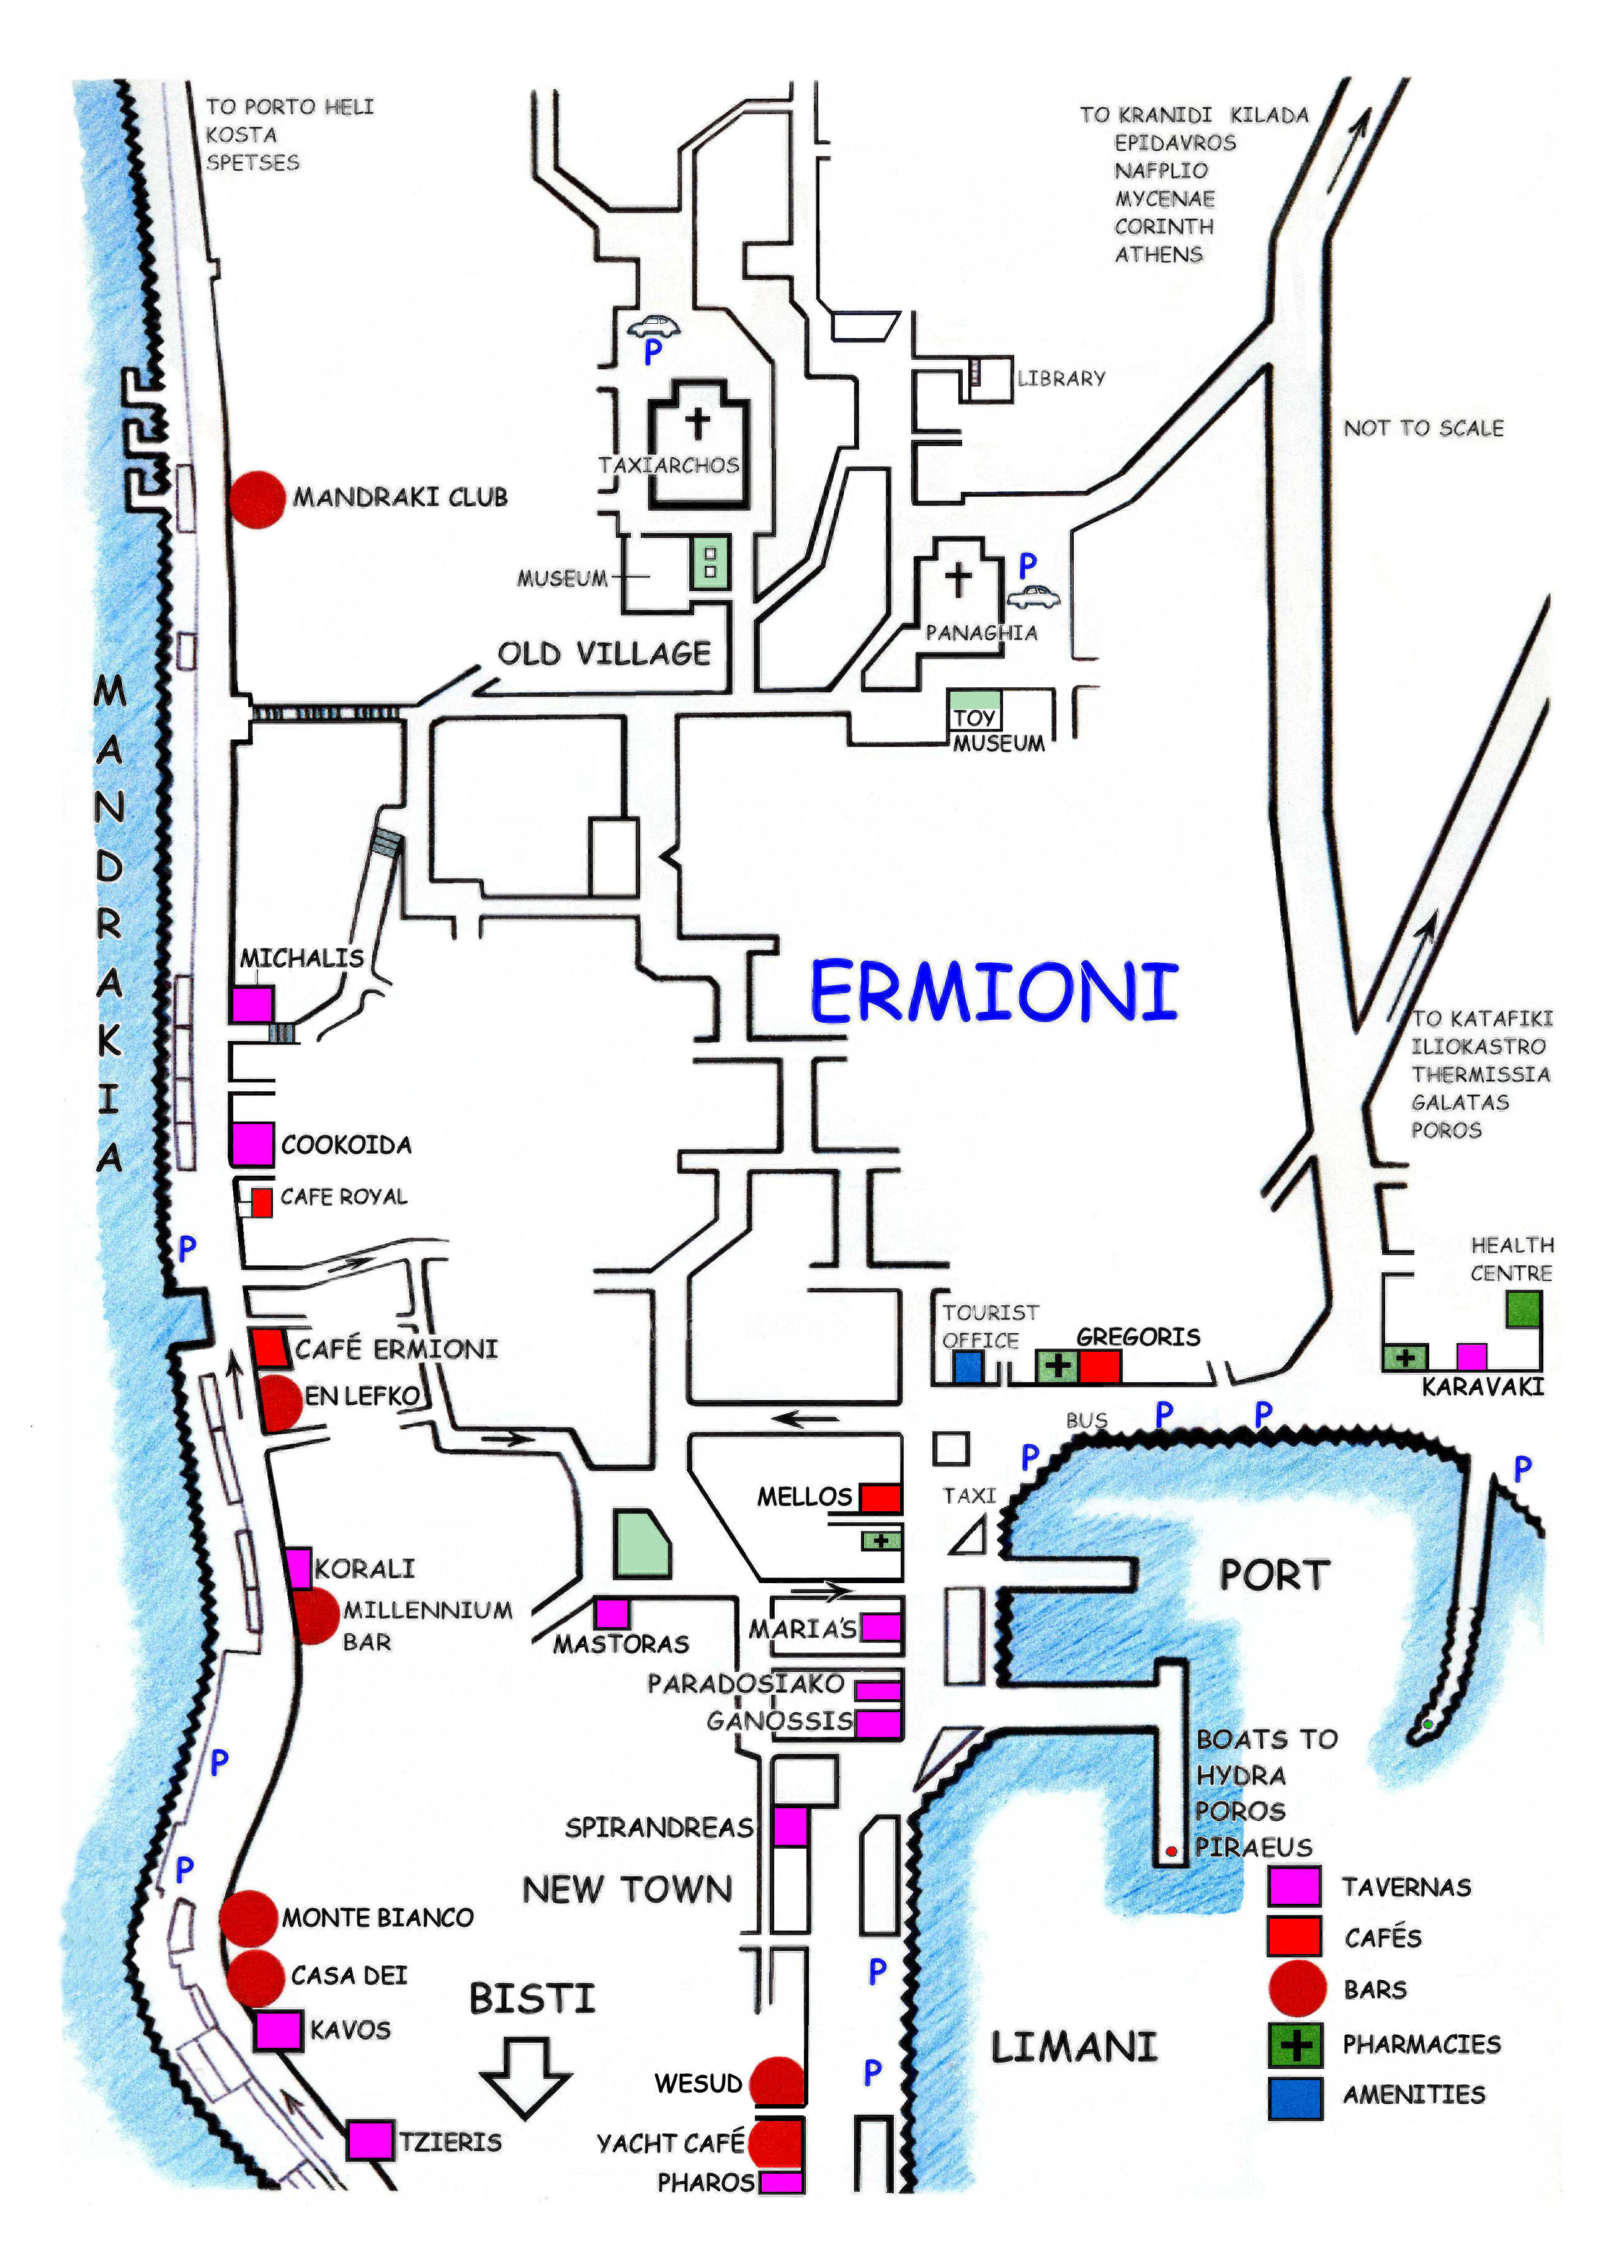 CAFES & BARS - In Ermioni